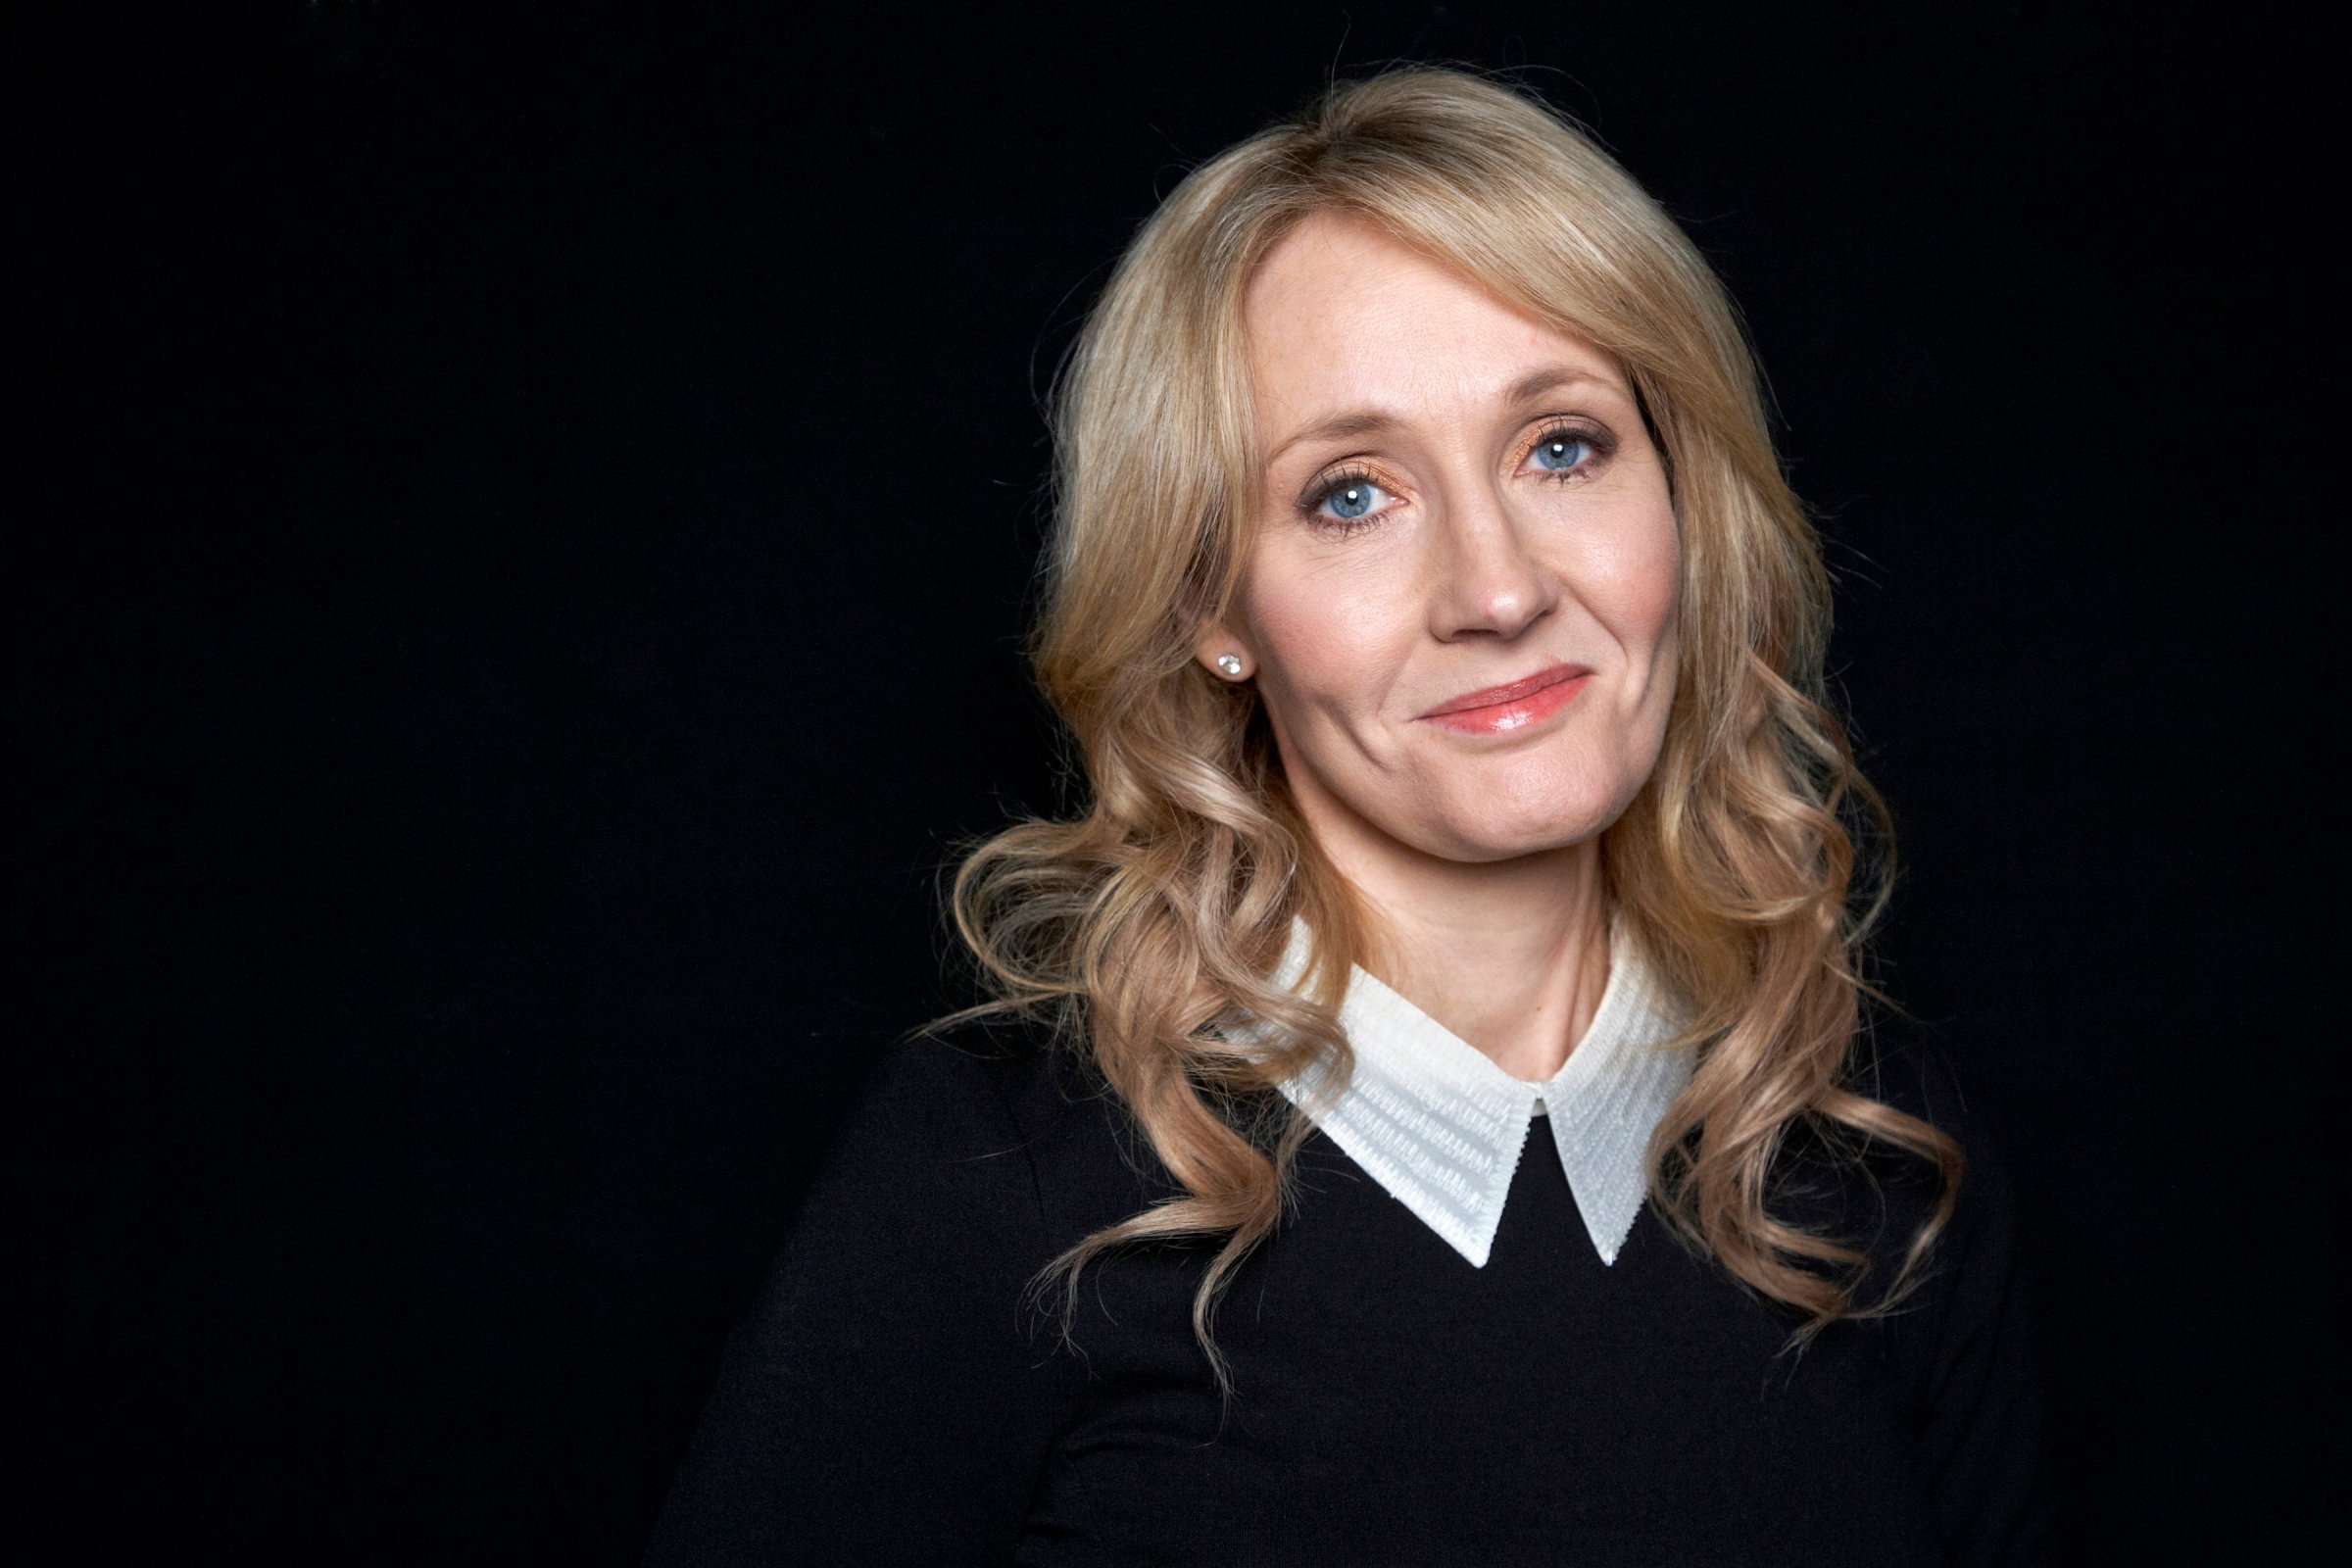 J.K. Rowling poses for a photo during an appearance at The David H. Koch Theater in New York on Oct. 16, 2012.